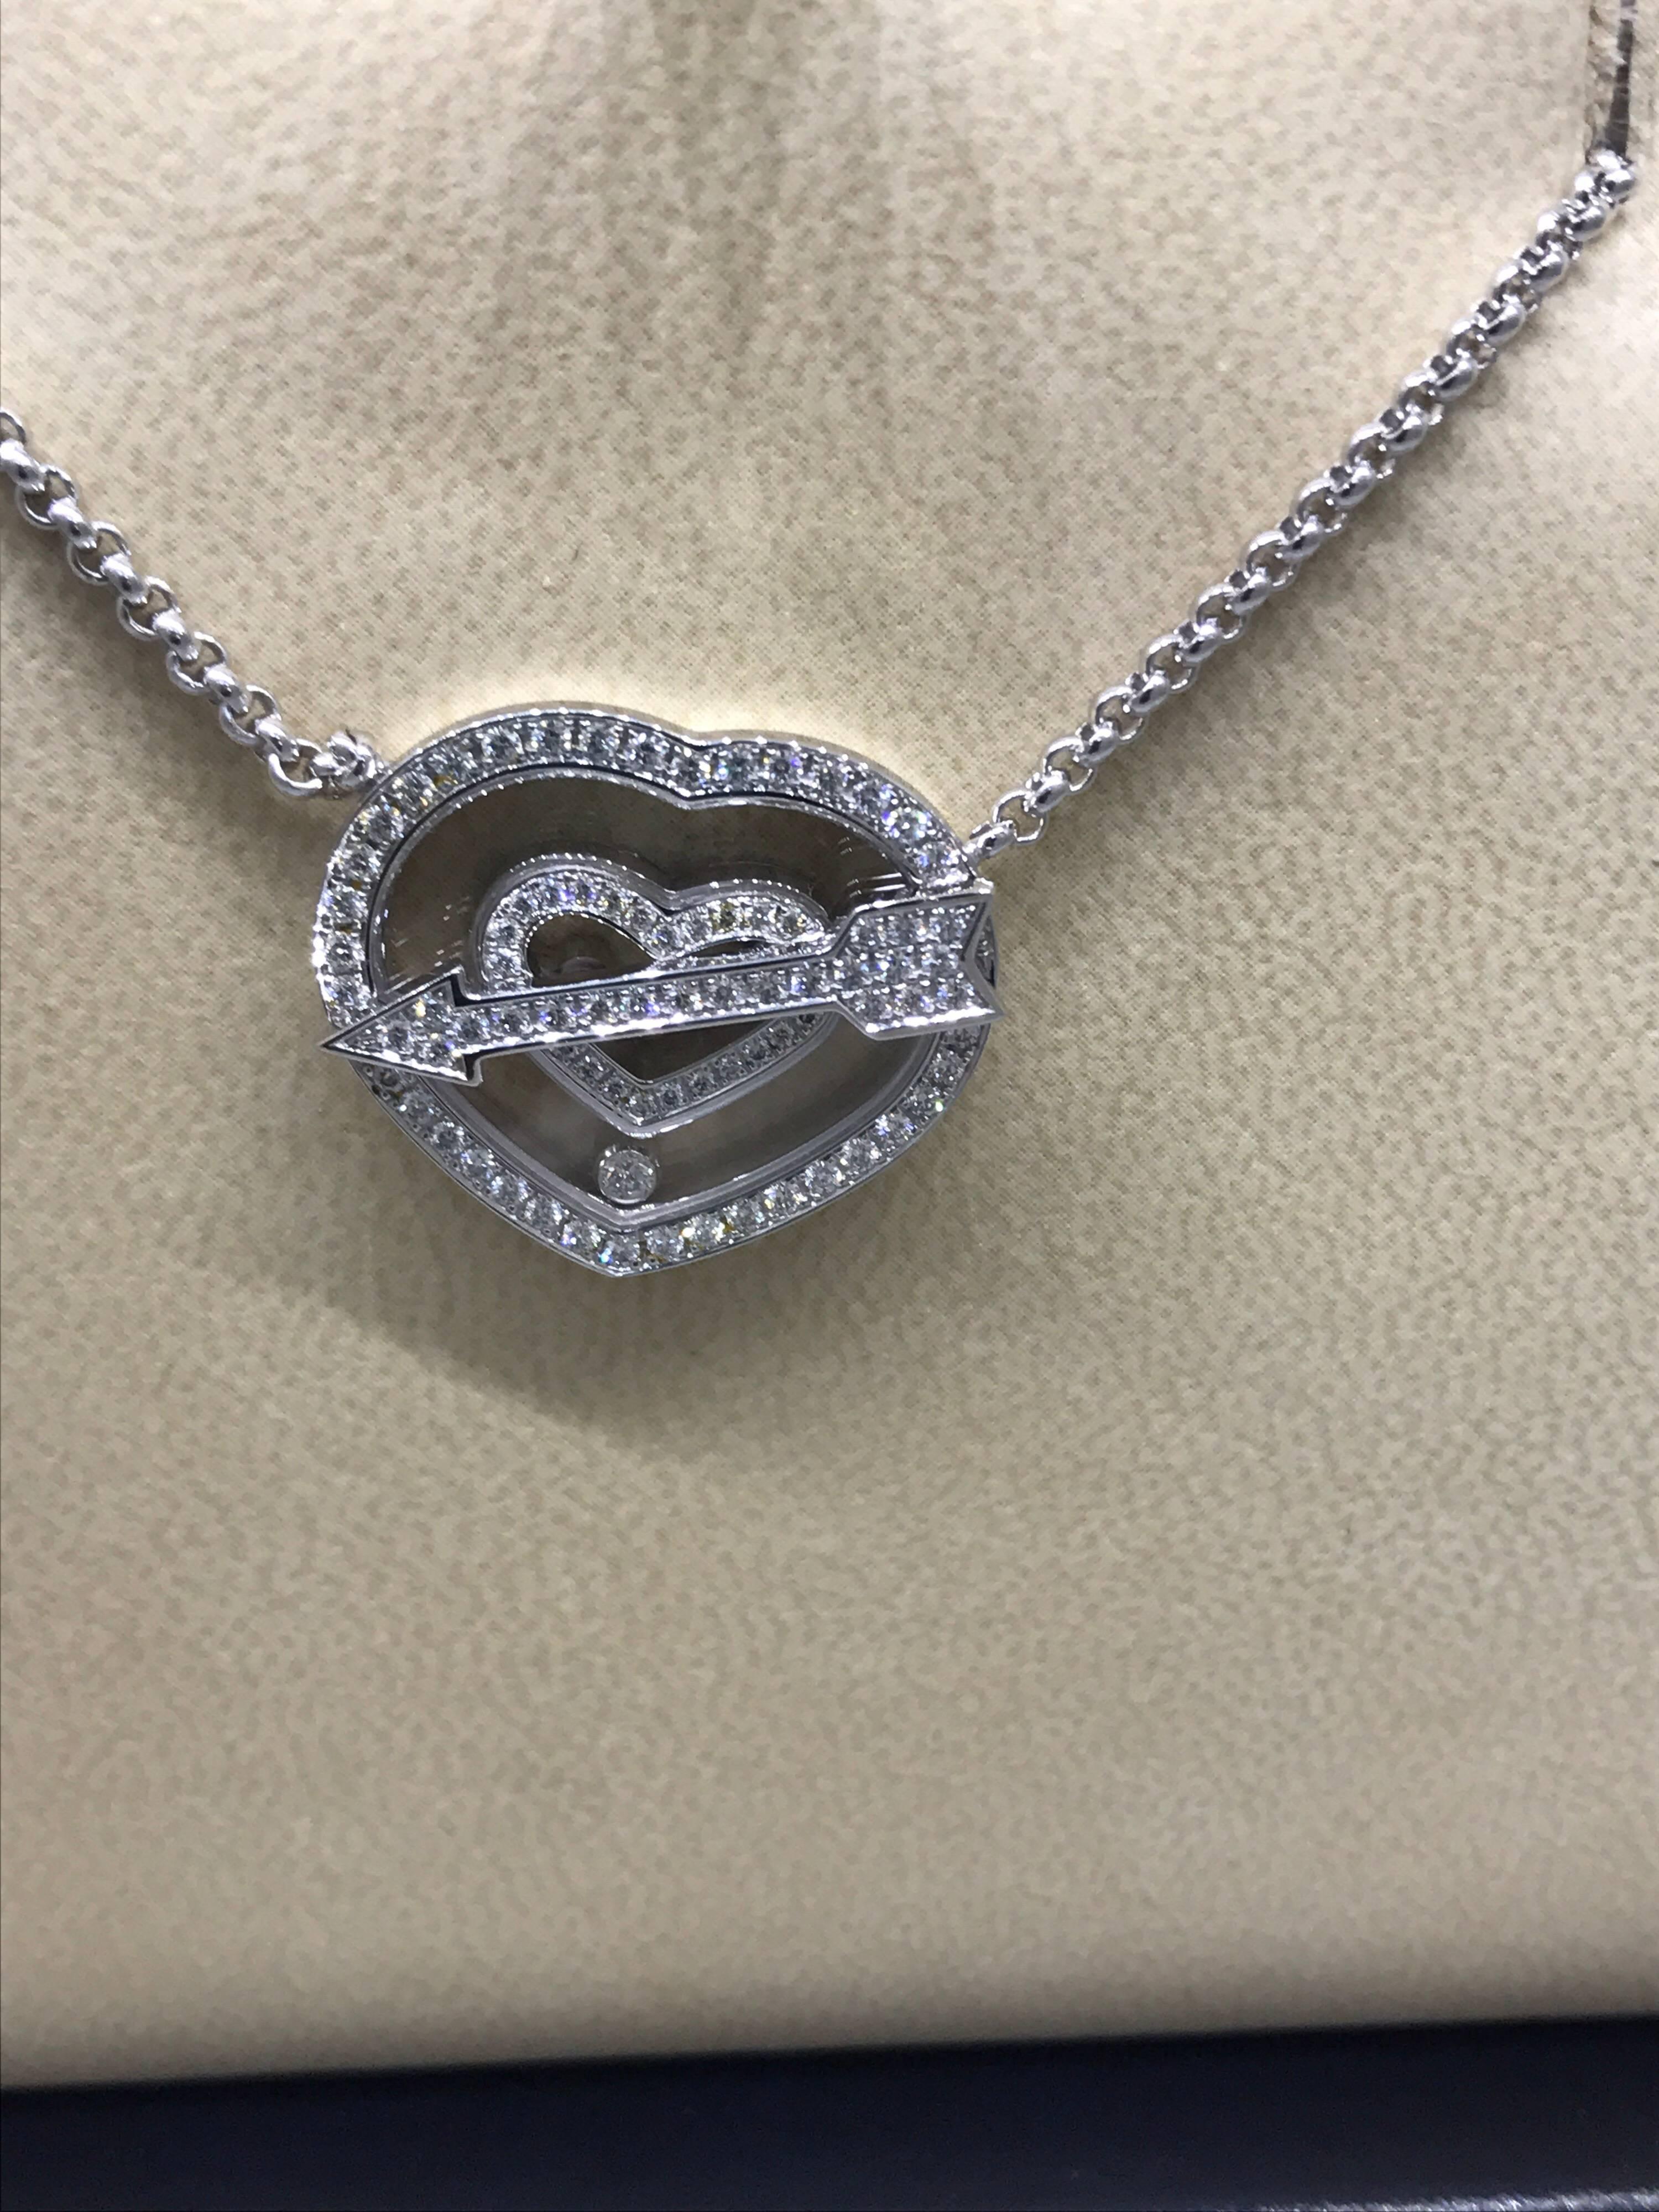 Chopard Happy Diamonds Heart Pendant Necklace

Model Number: 81/6599-1002

100% Authentic

Brand New

Comes with original Chopard box, certificate of authenticity and warranty, and jewels manual

18 Karat White Gold 18.10gr

79 Diamonds on the